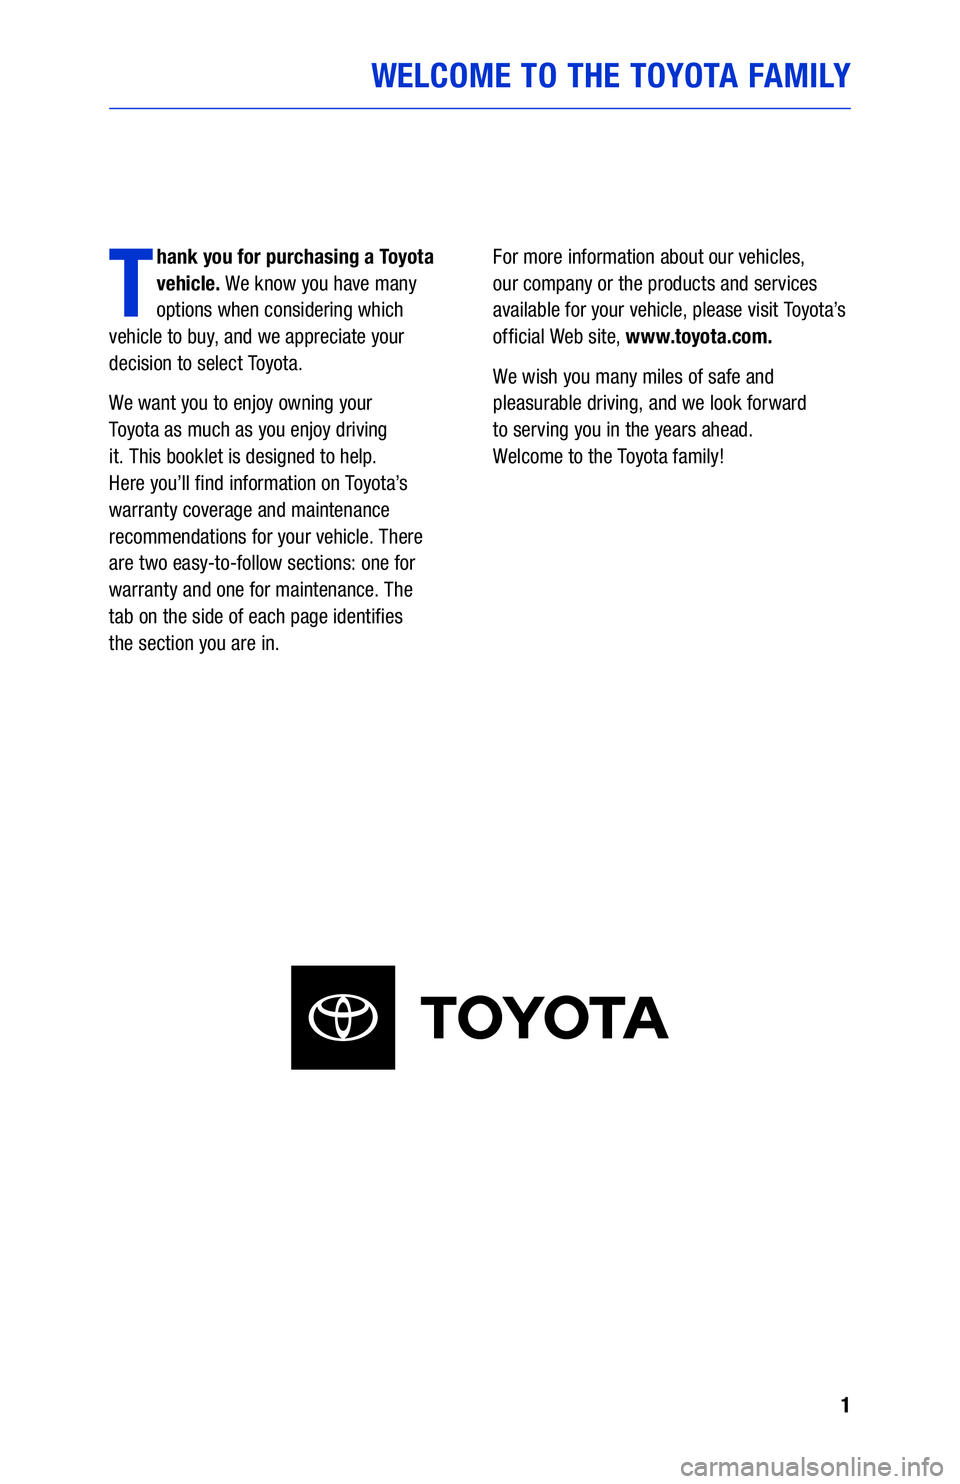 TOYOTA LAND CRUISER 2020  Warranties & Maintenance Guides (in English) 1
WELCOME TO THE TOYOTA FAMILY
T
hank you for purchasing a Toyota 
vehicle. We know you have many 
options when considering which  
vehicle to buy, and we appreciate your 
decision to select Toyota.
W